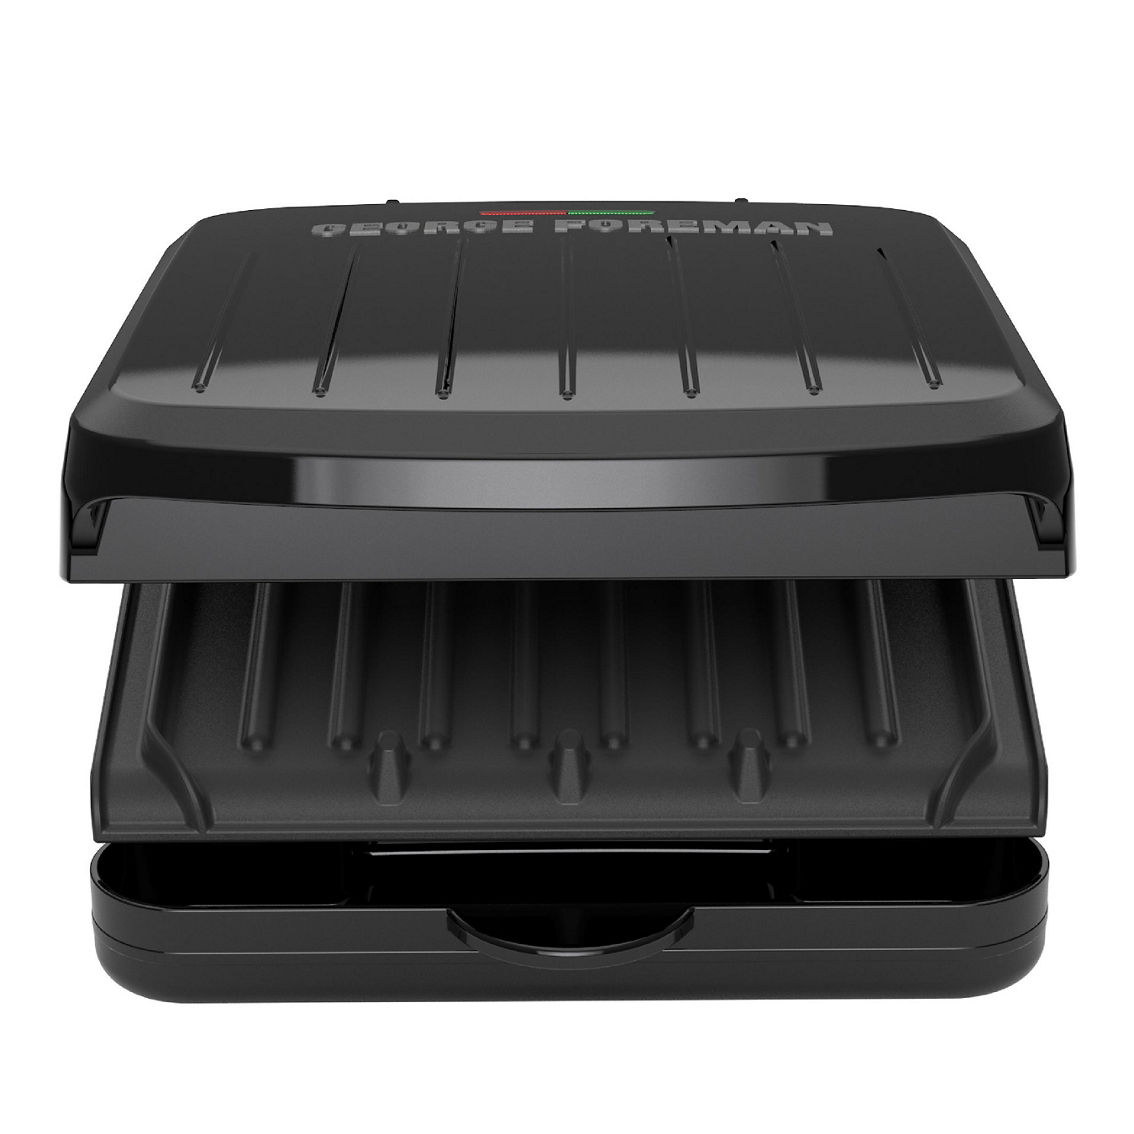 George Foreman 5-serving Classic Plate Grill